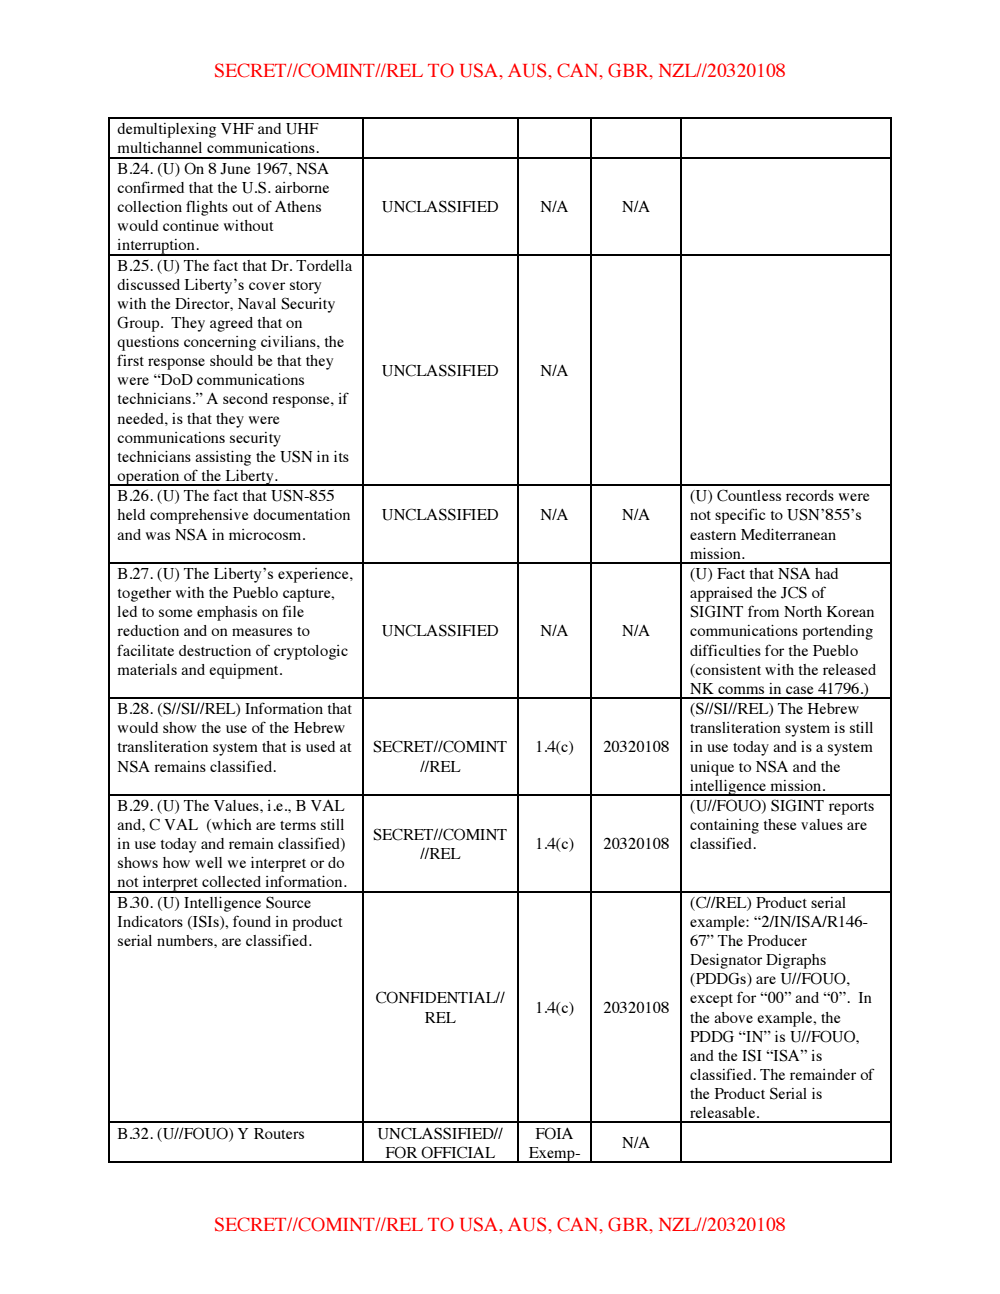 Page 7 from NSA’s USS Liberty Incident Classification Guide